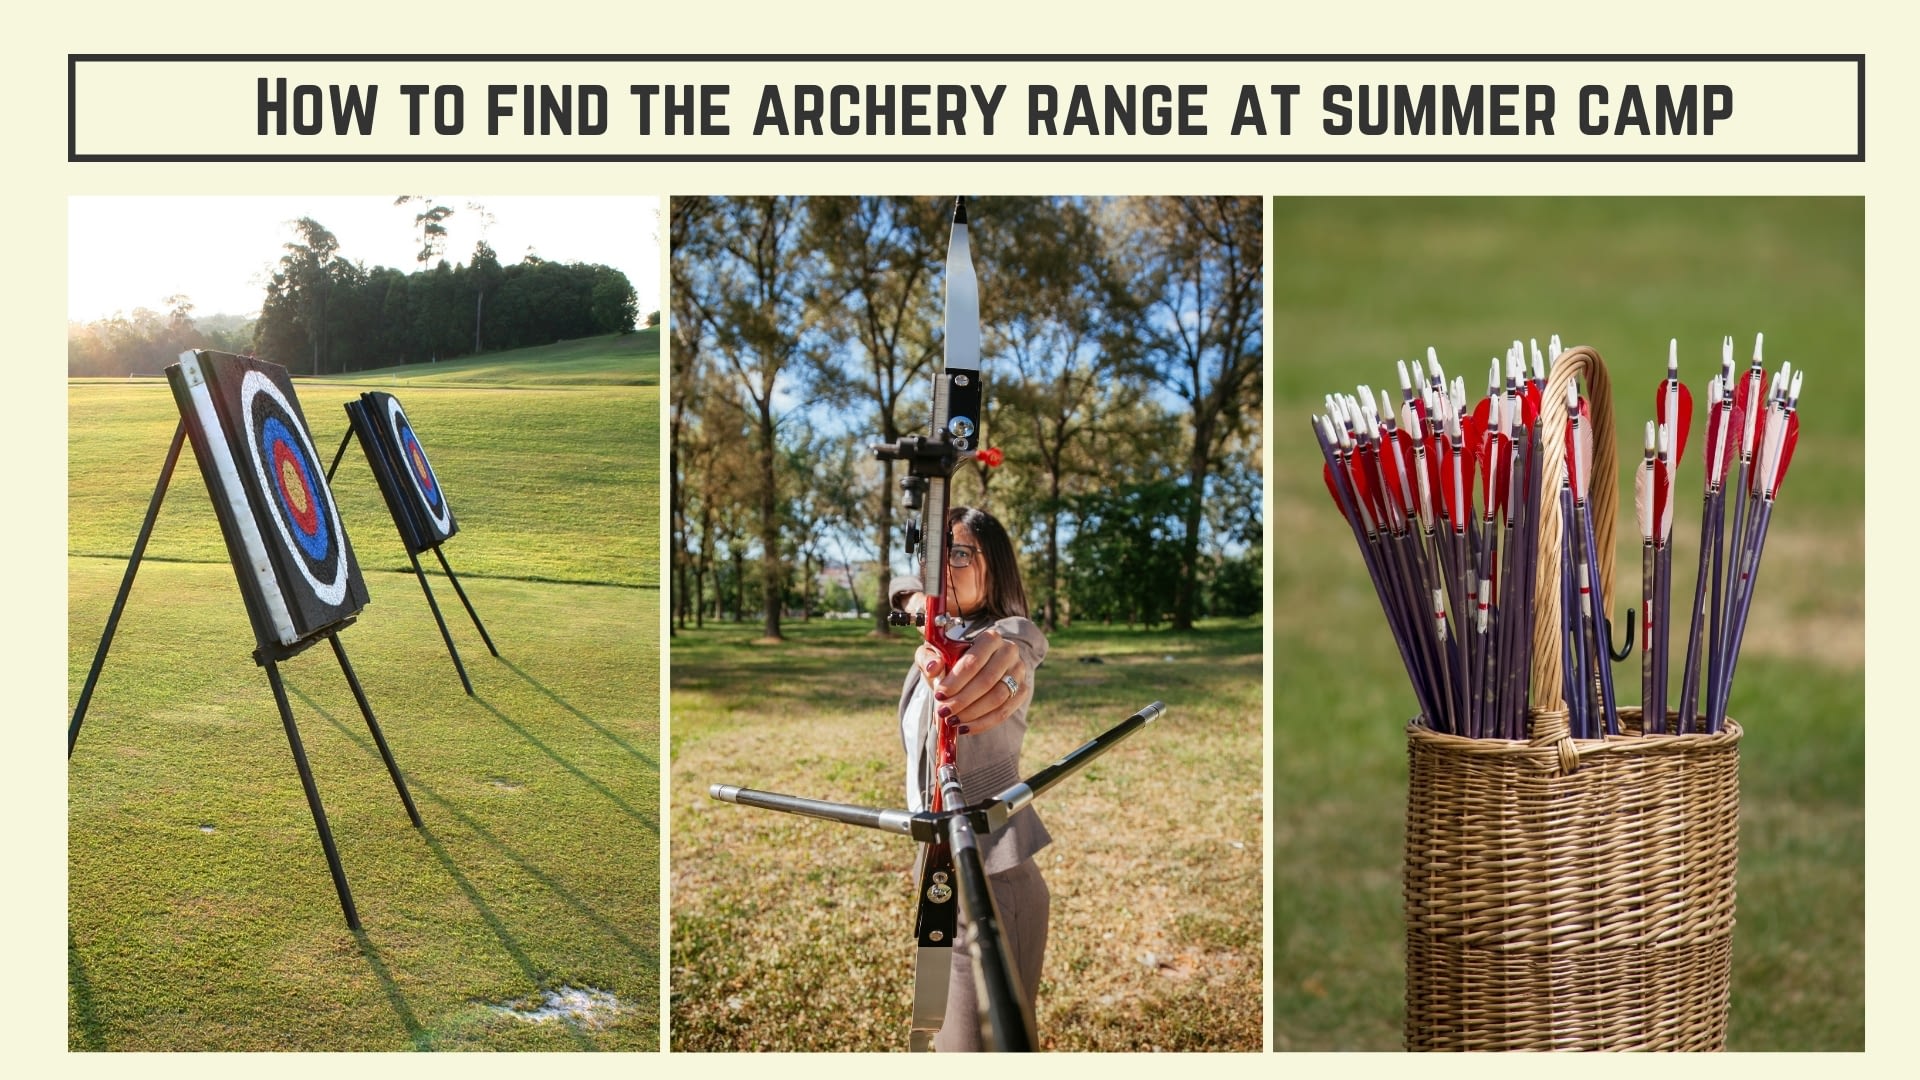 How to find the archery range at summer camp